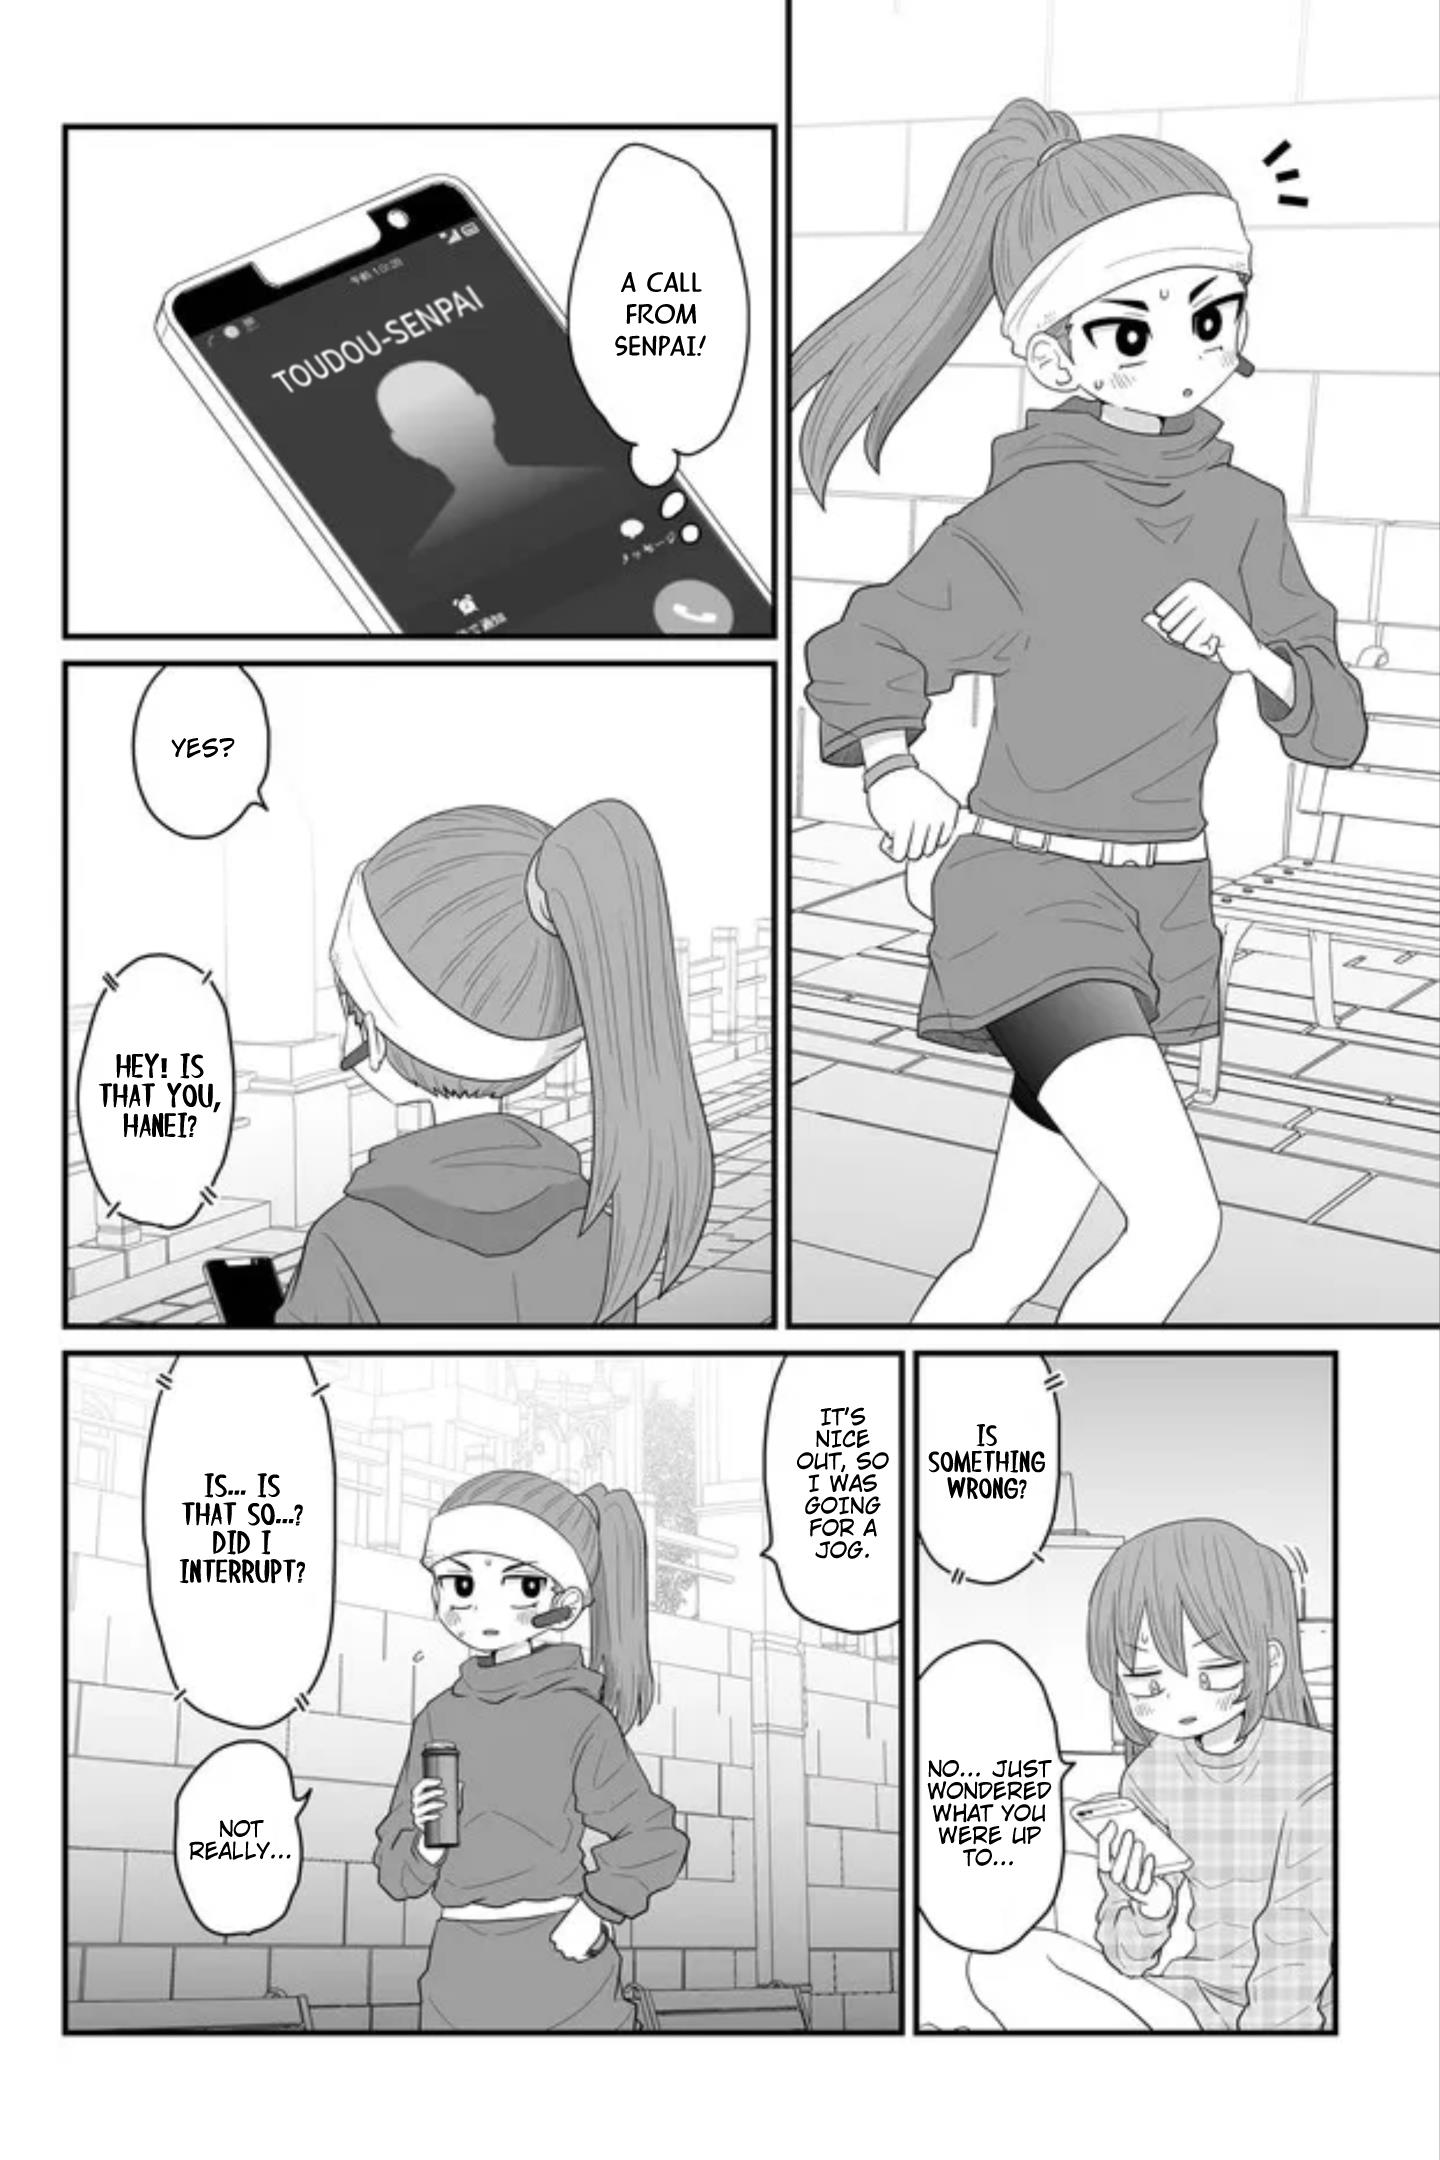 Sorry But I'm Not Yuri - Page 2